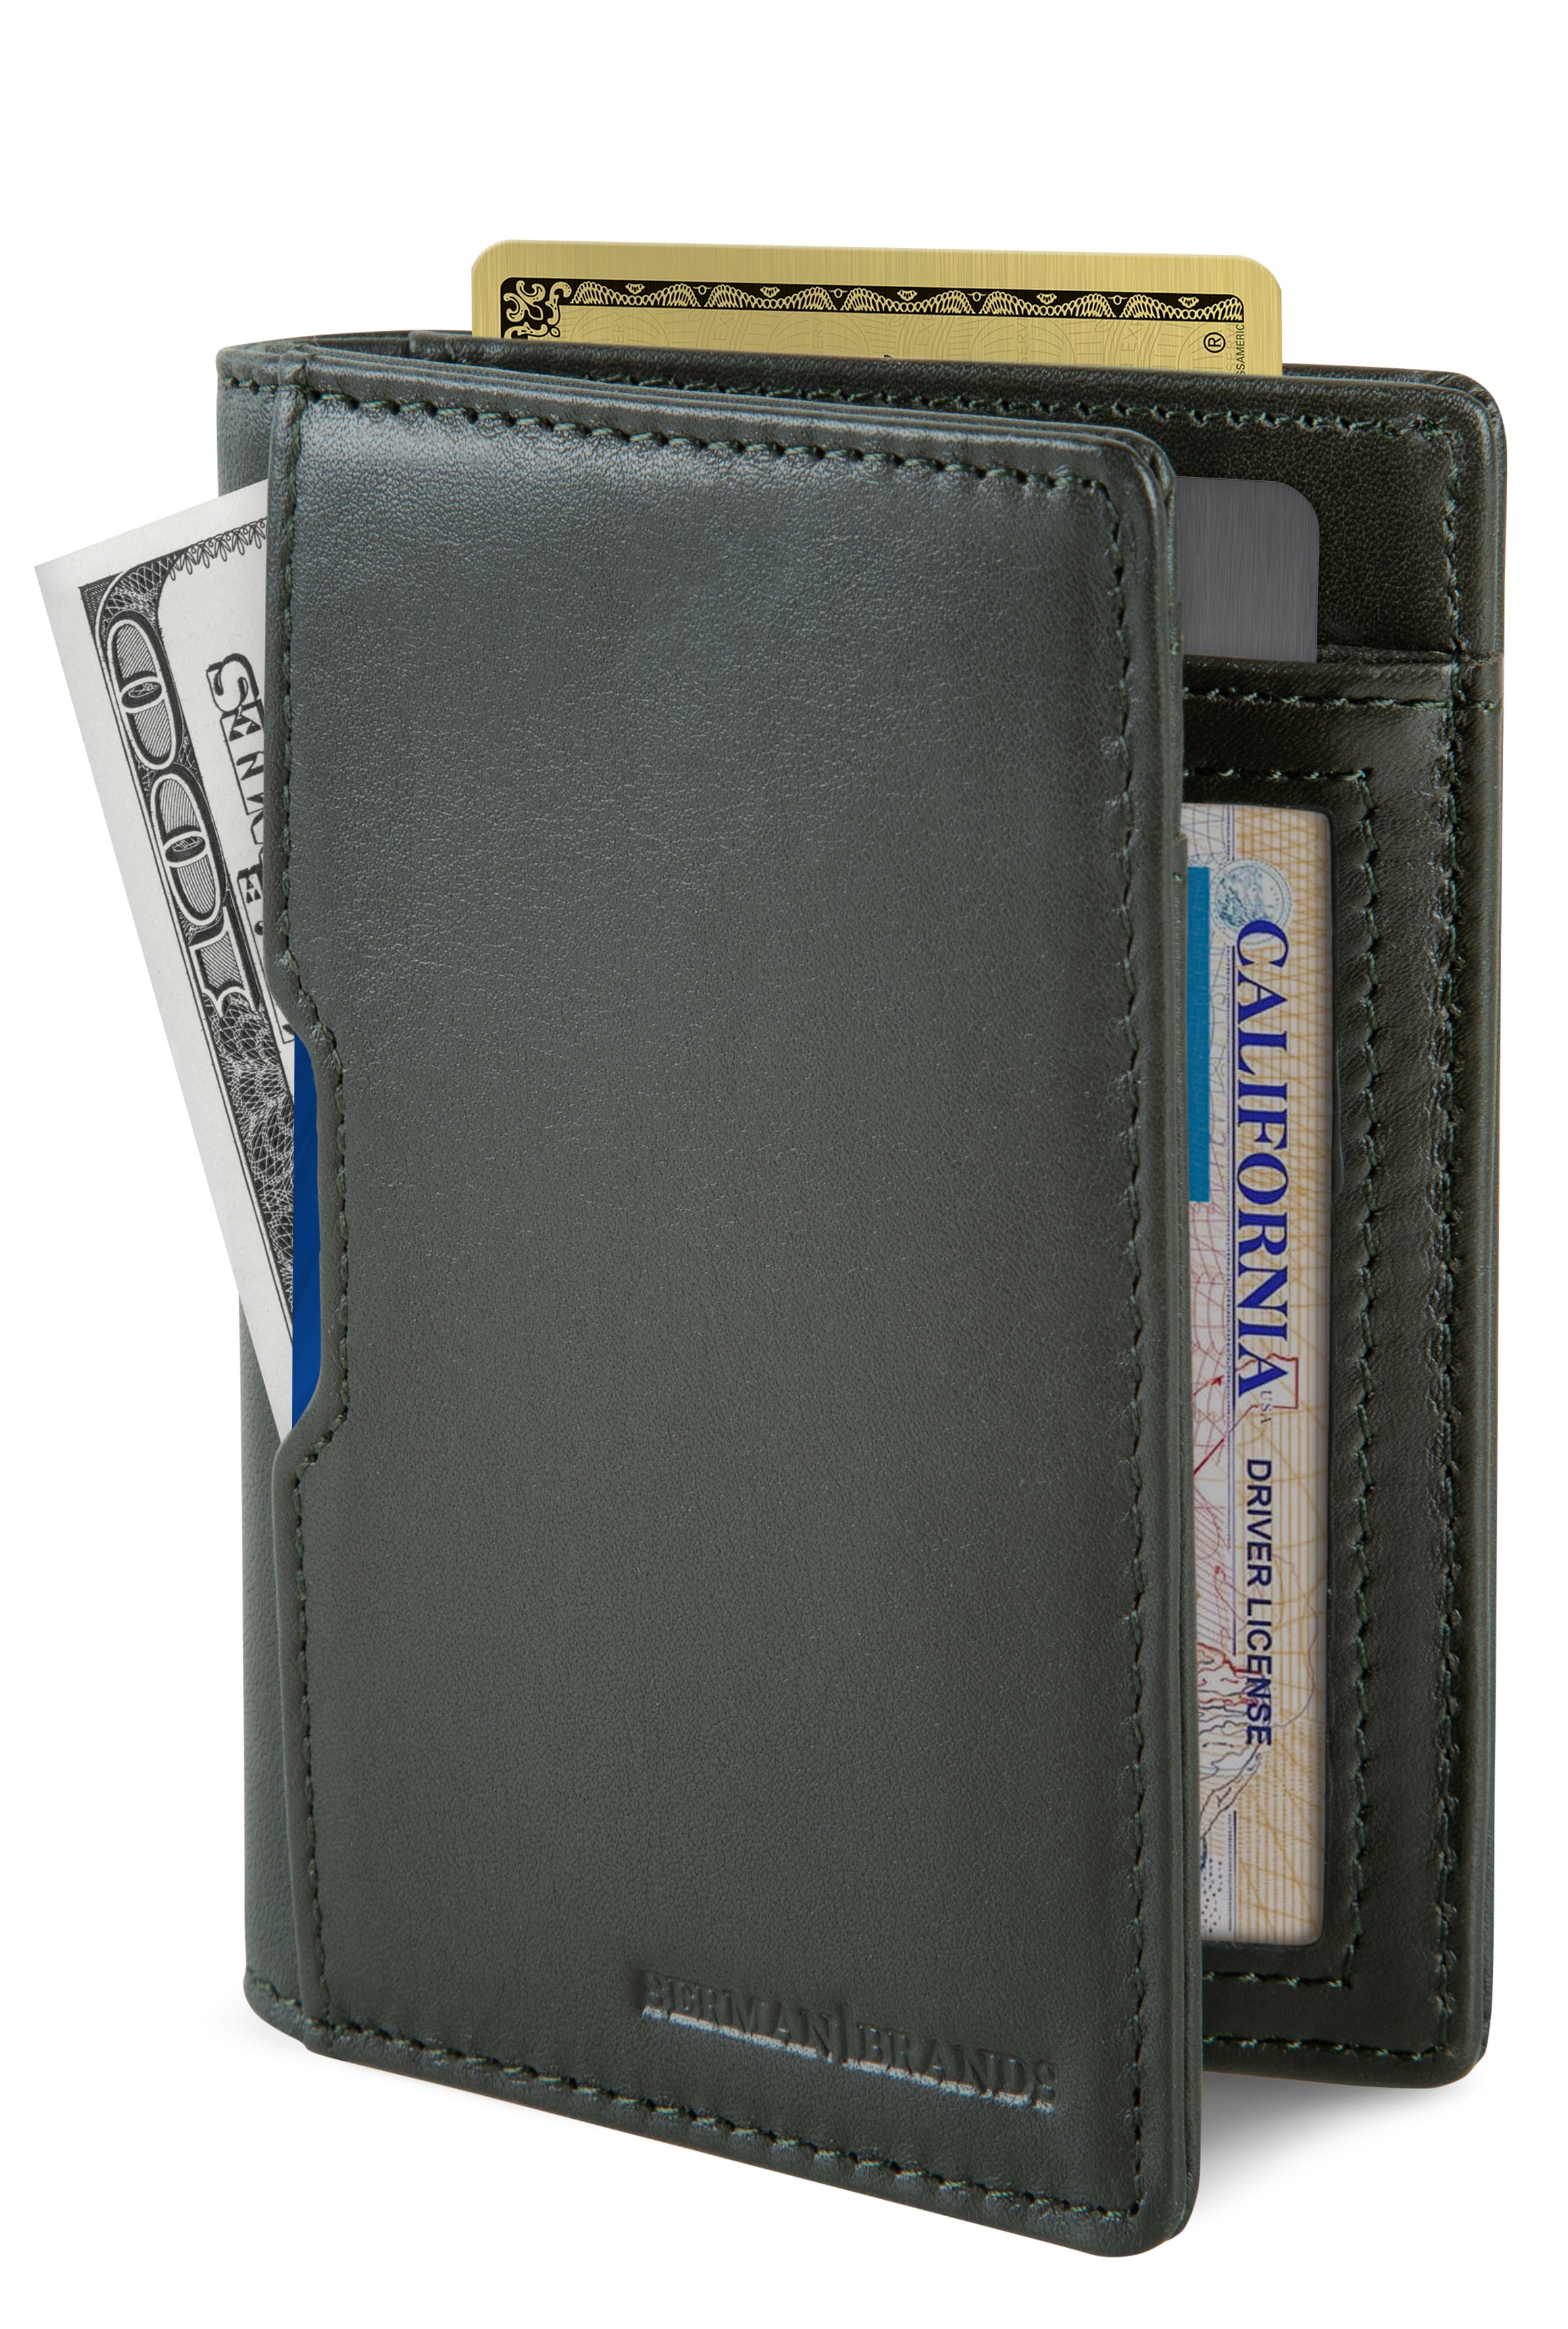 Slim brown faux leather credit card oyster soft  thin wallet ID case 7 slots 